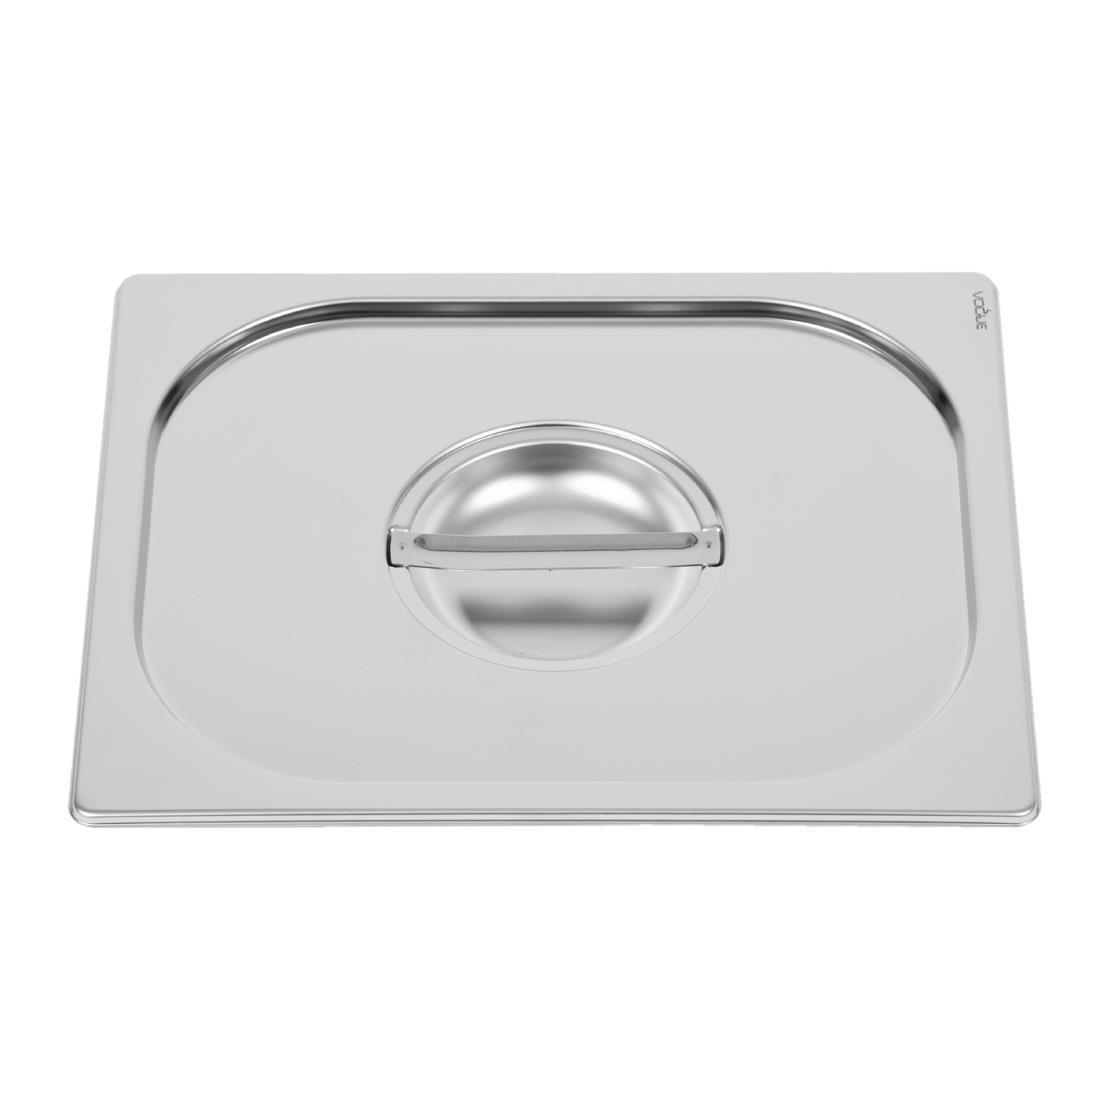 Vogue Heavy Duty Stainless Steel 1/2 Gastronorm Pan Lid - DW456  - 3